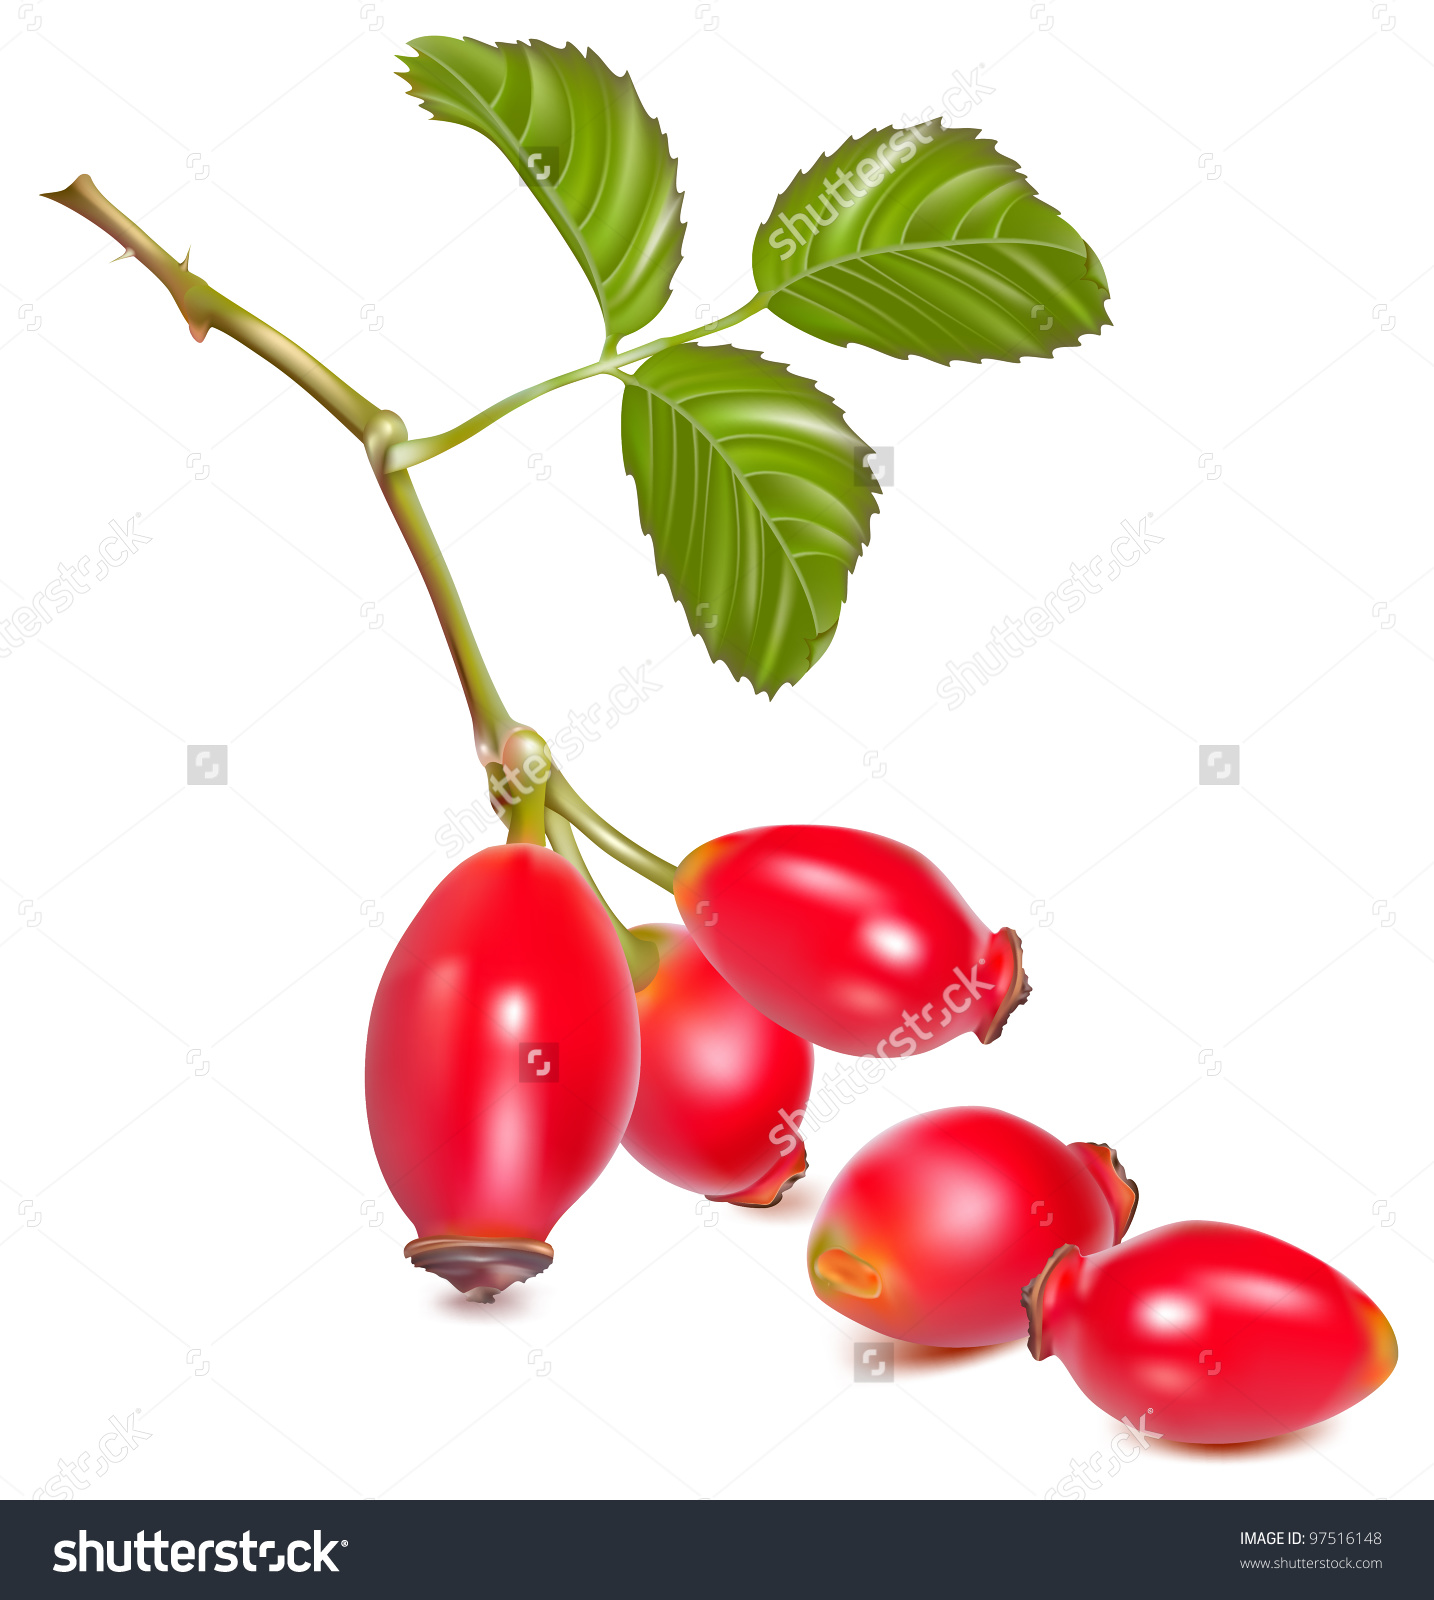 Rose Hip Fruit Leaves Dogrose Vector Stock Vector 97516148.